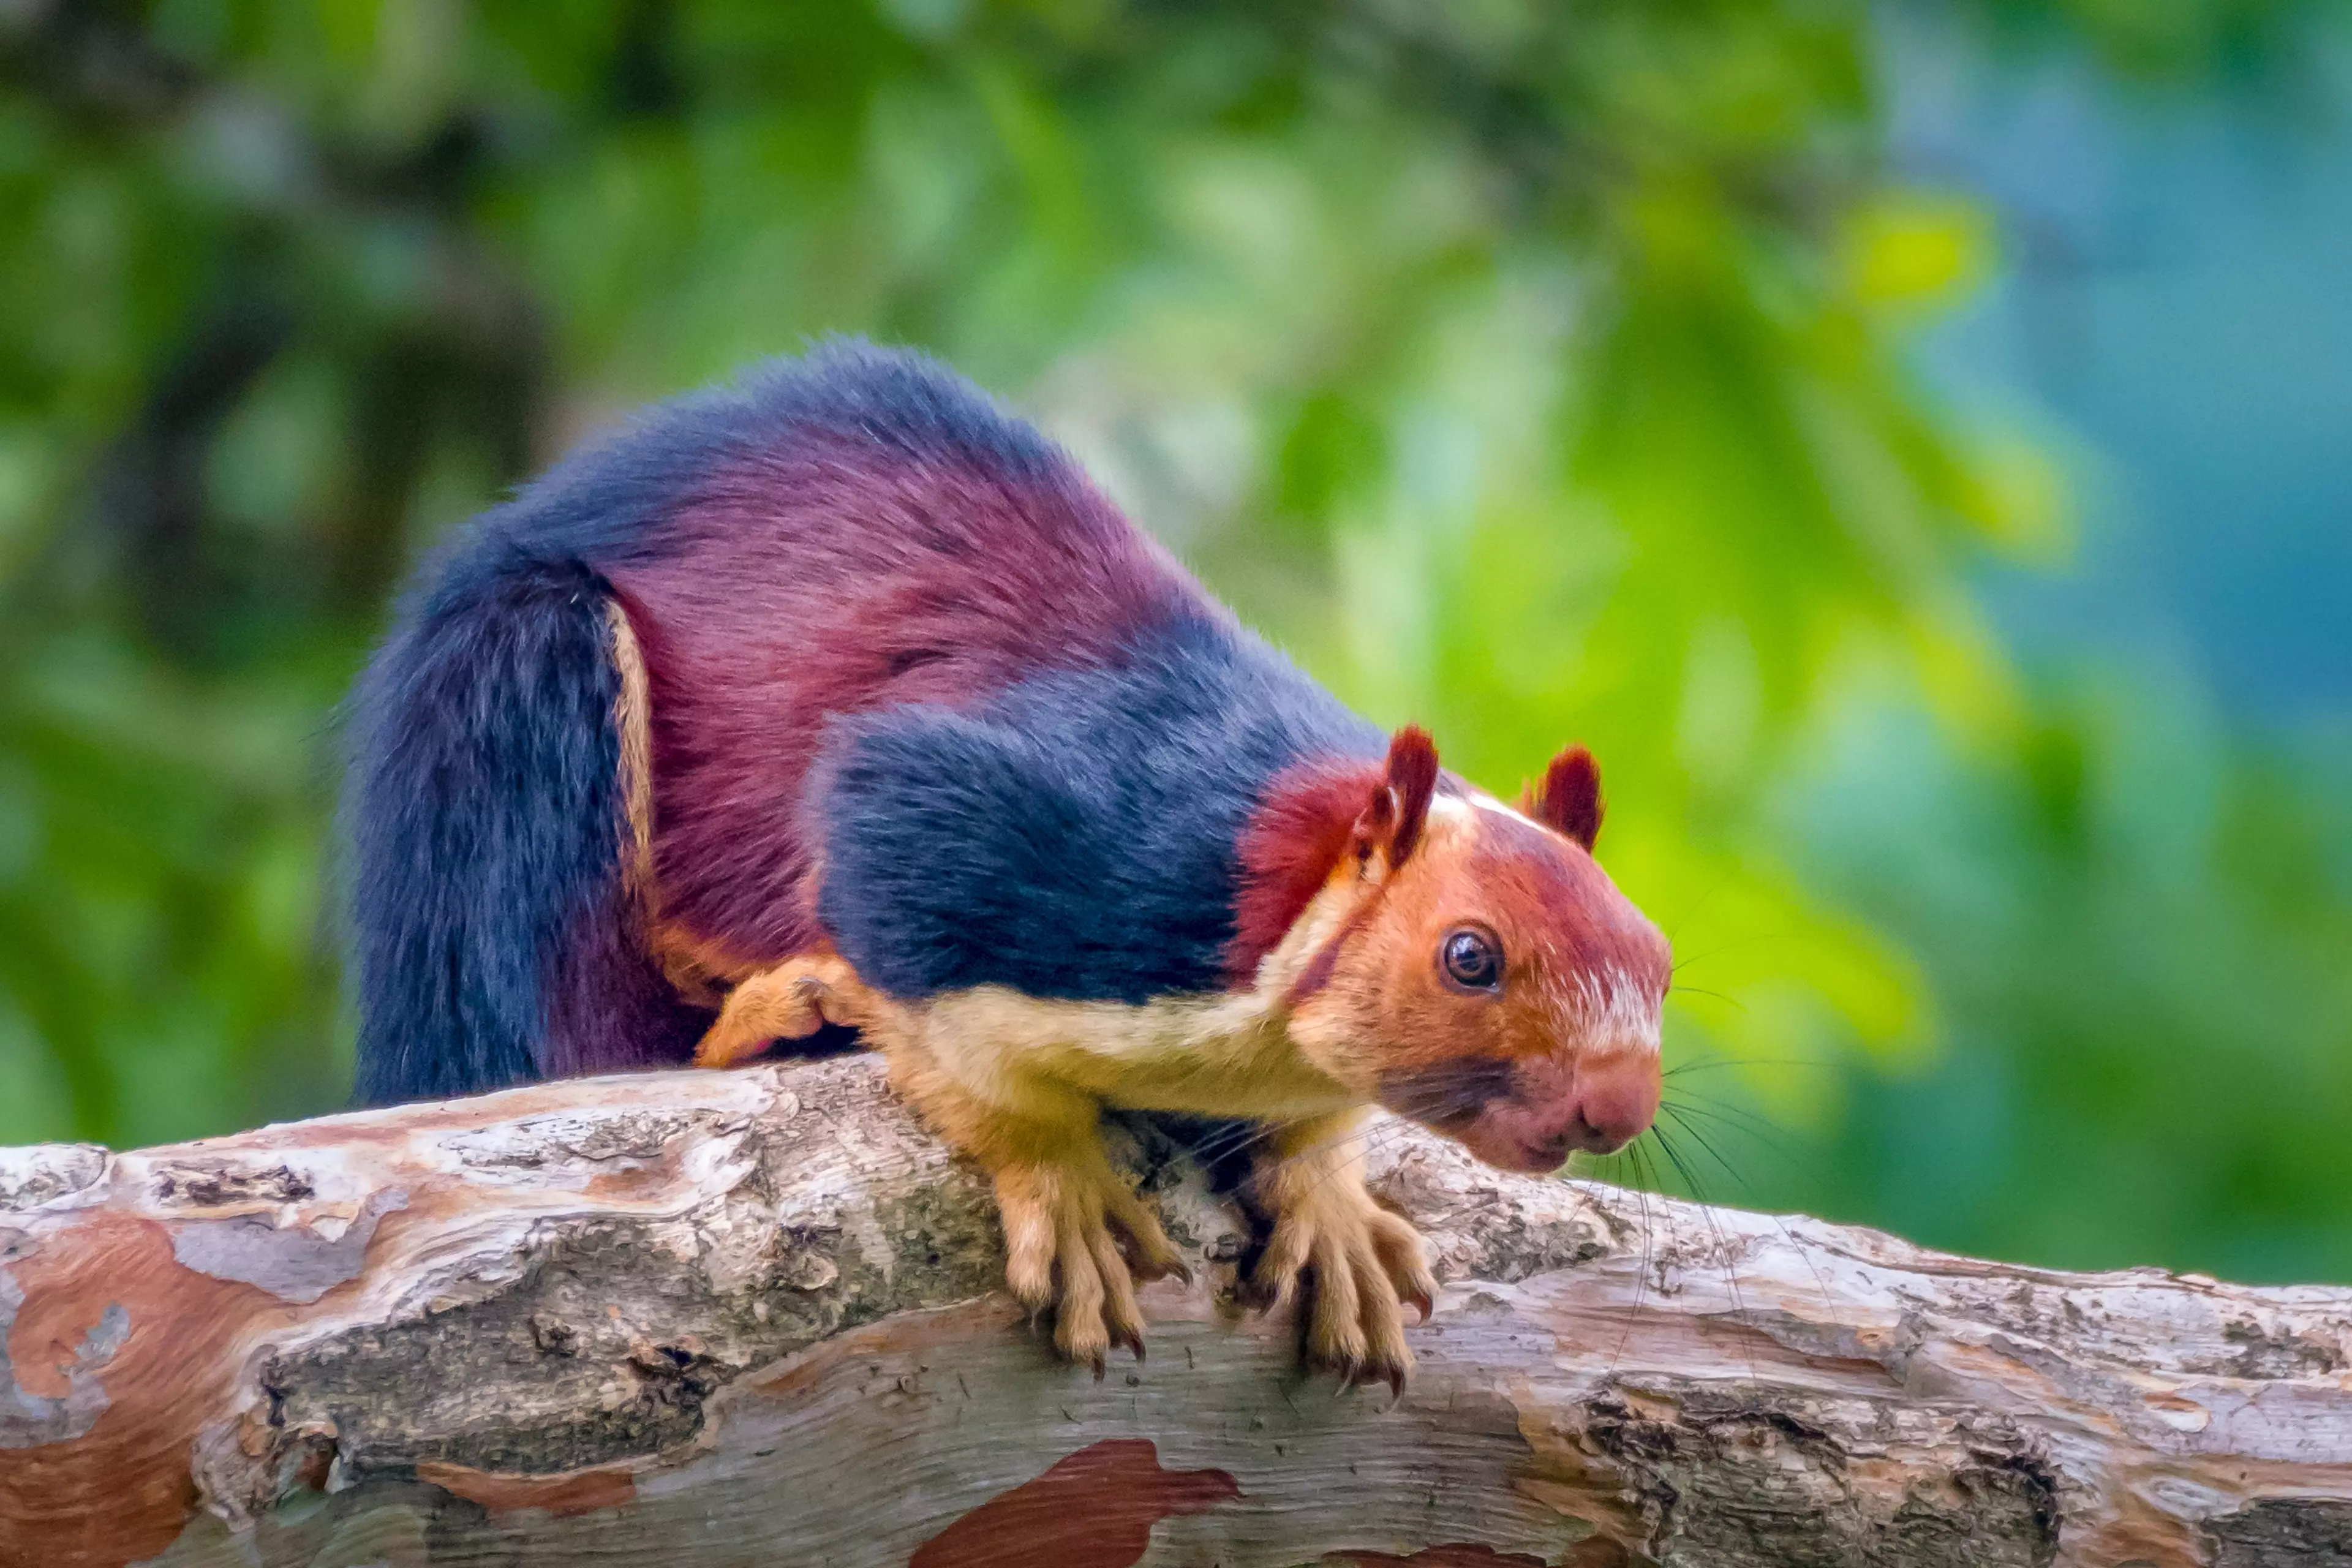 The squirrels measure up to 36 inches but can jump 20 foot.